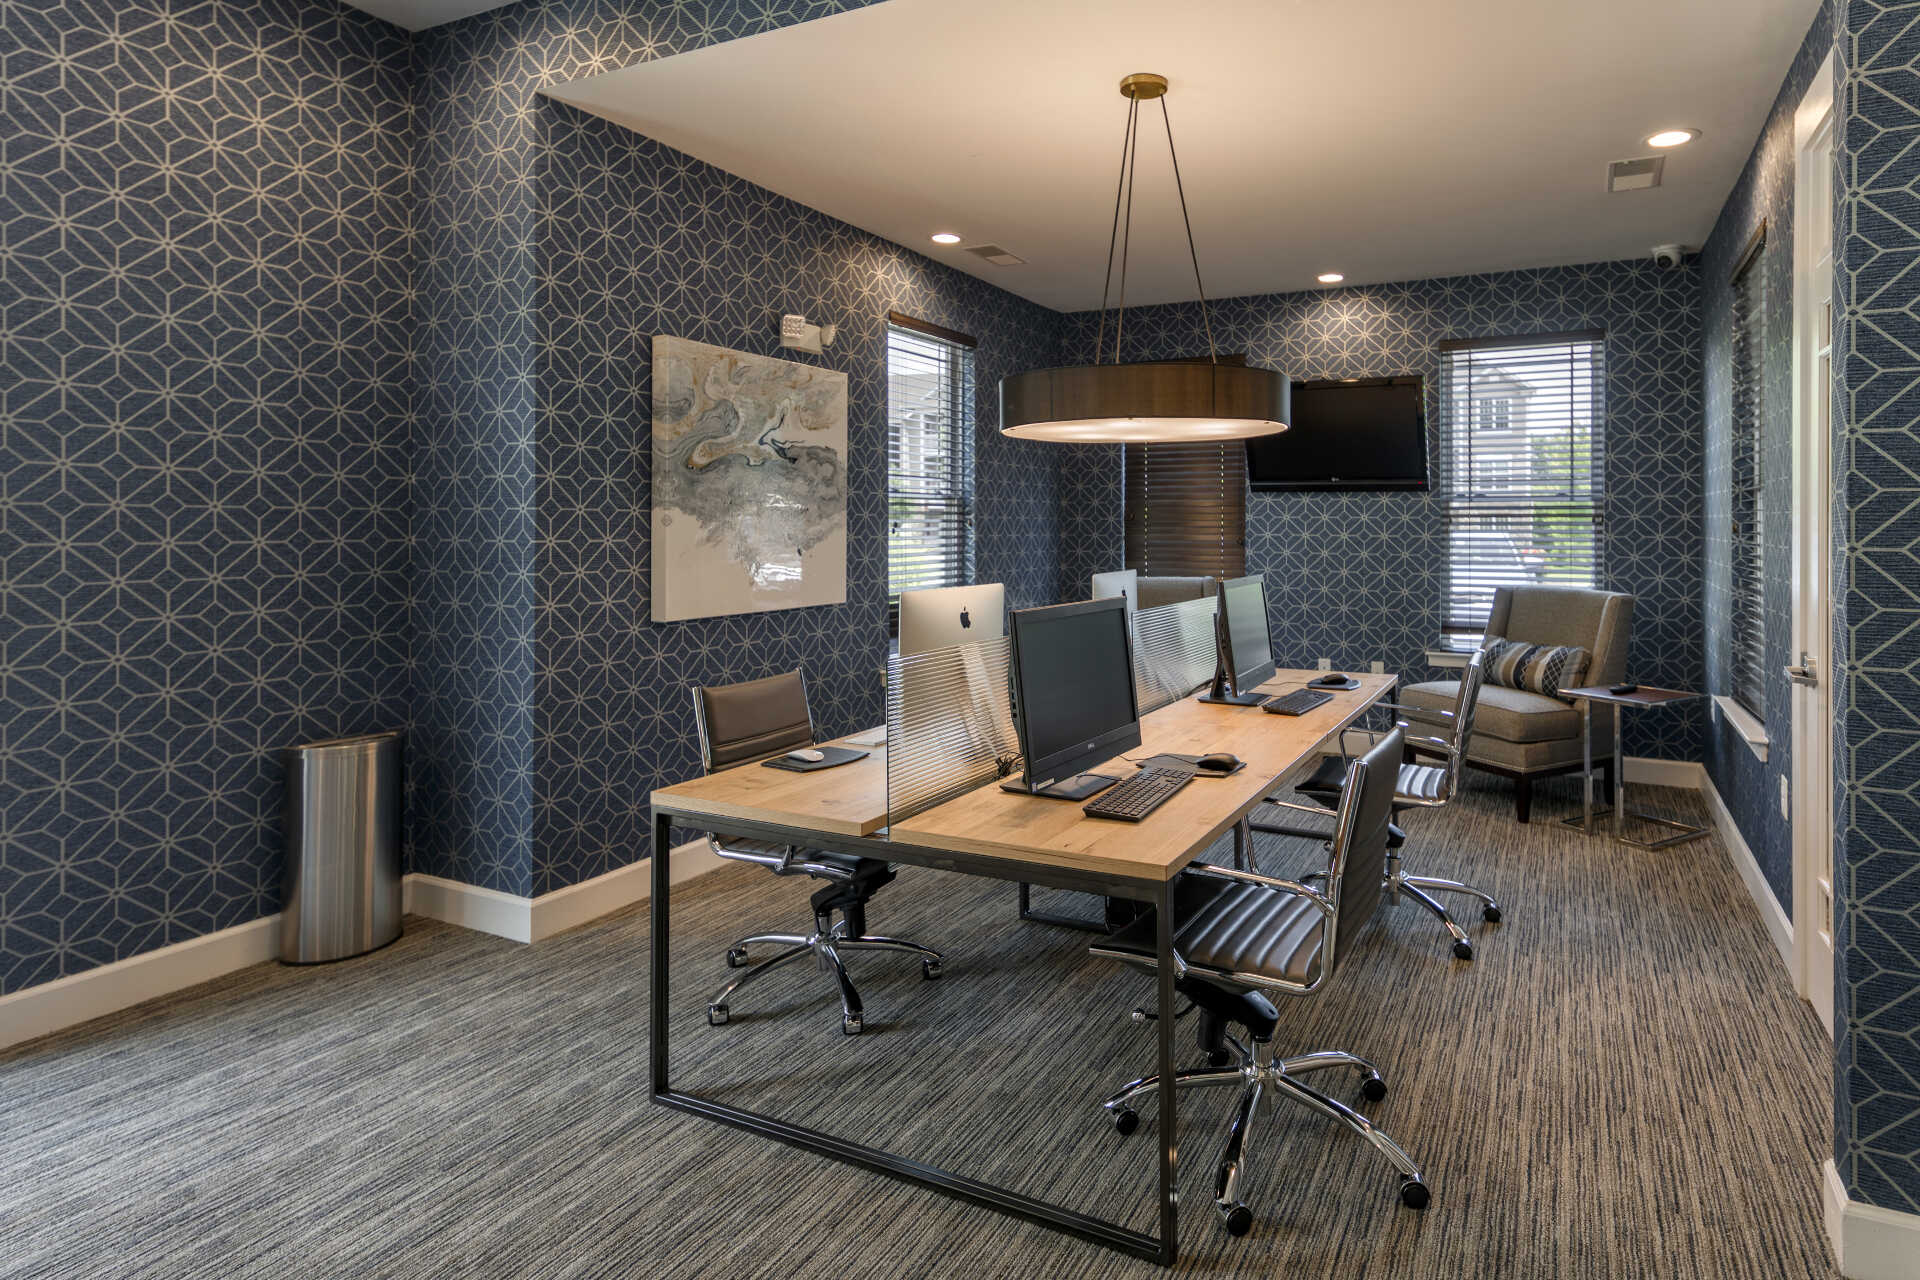 Chesapeake Ridge : Take care of a quick project in the business center.